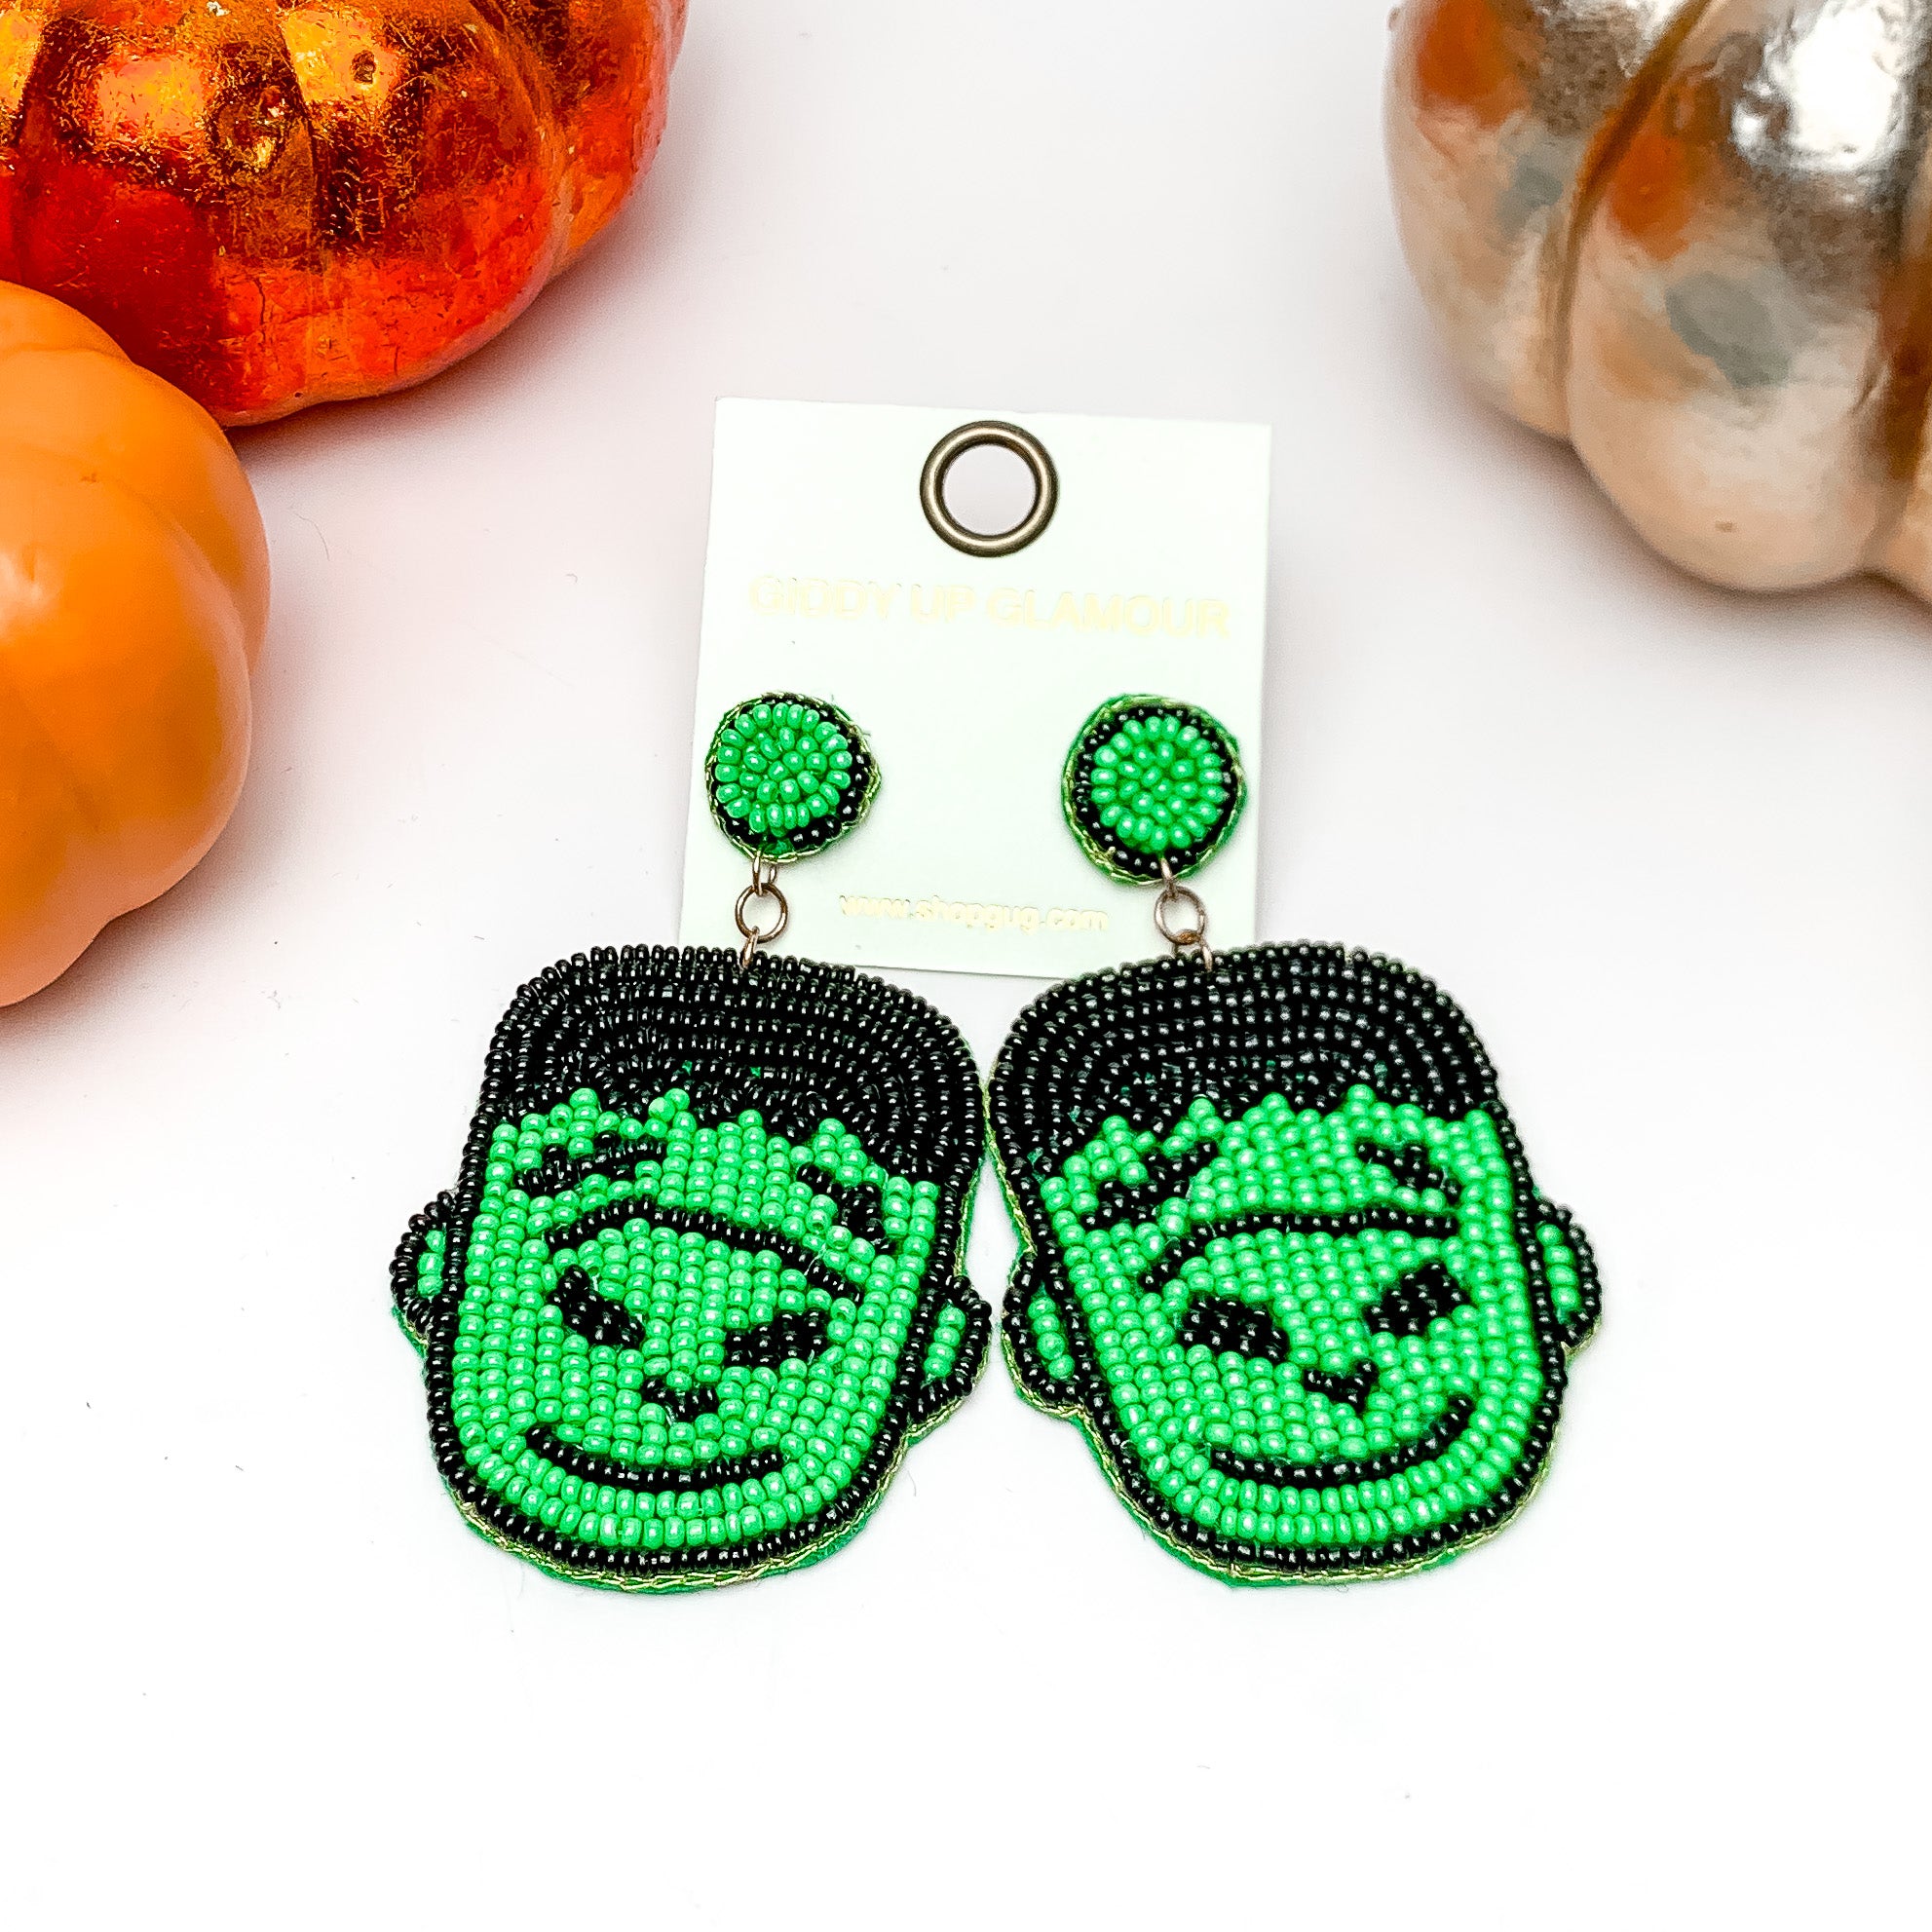 Beaded Frankenstein Earrings in Green, and Black. These earrings are on a white background with orange and silver pumpkins around them.